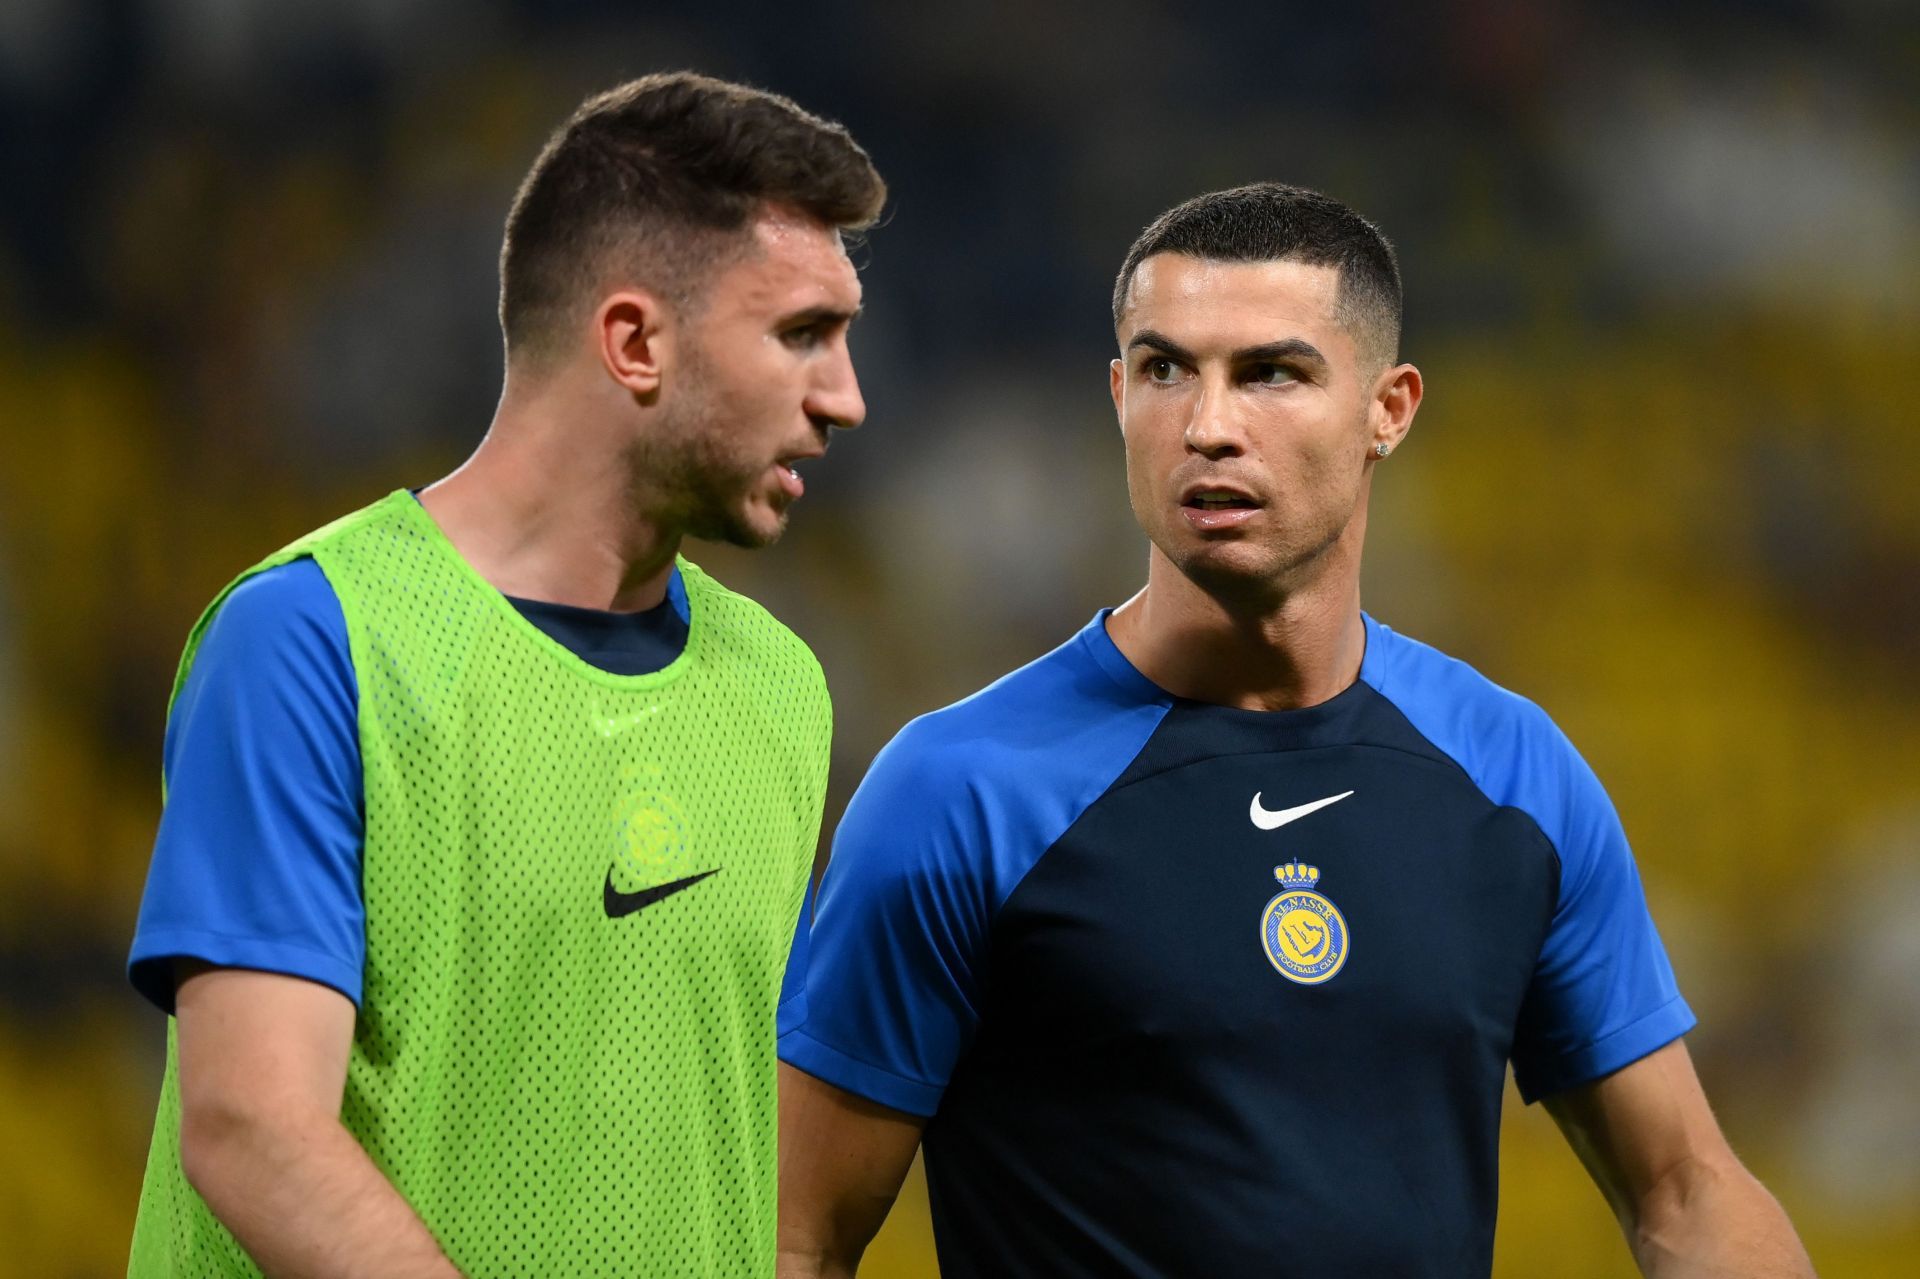 Former Manchester City star Aymeric Laporte (left) claims players are dissatisfied in Saudi Arabia.